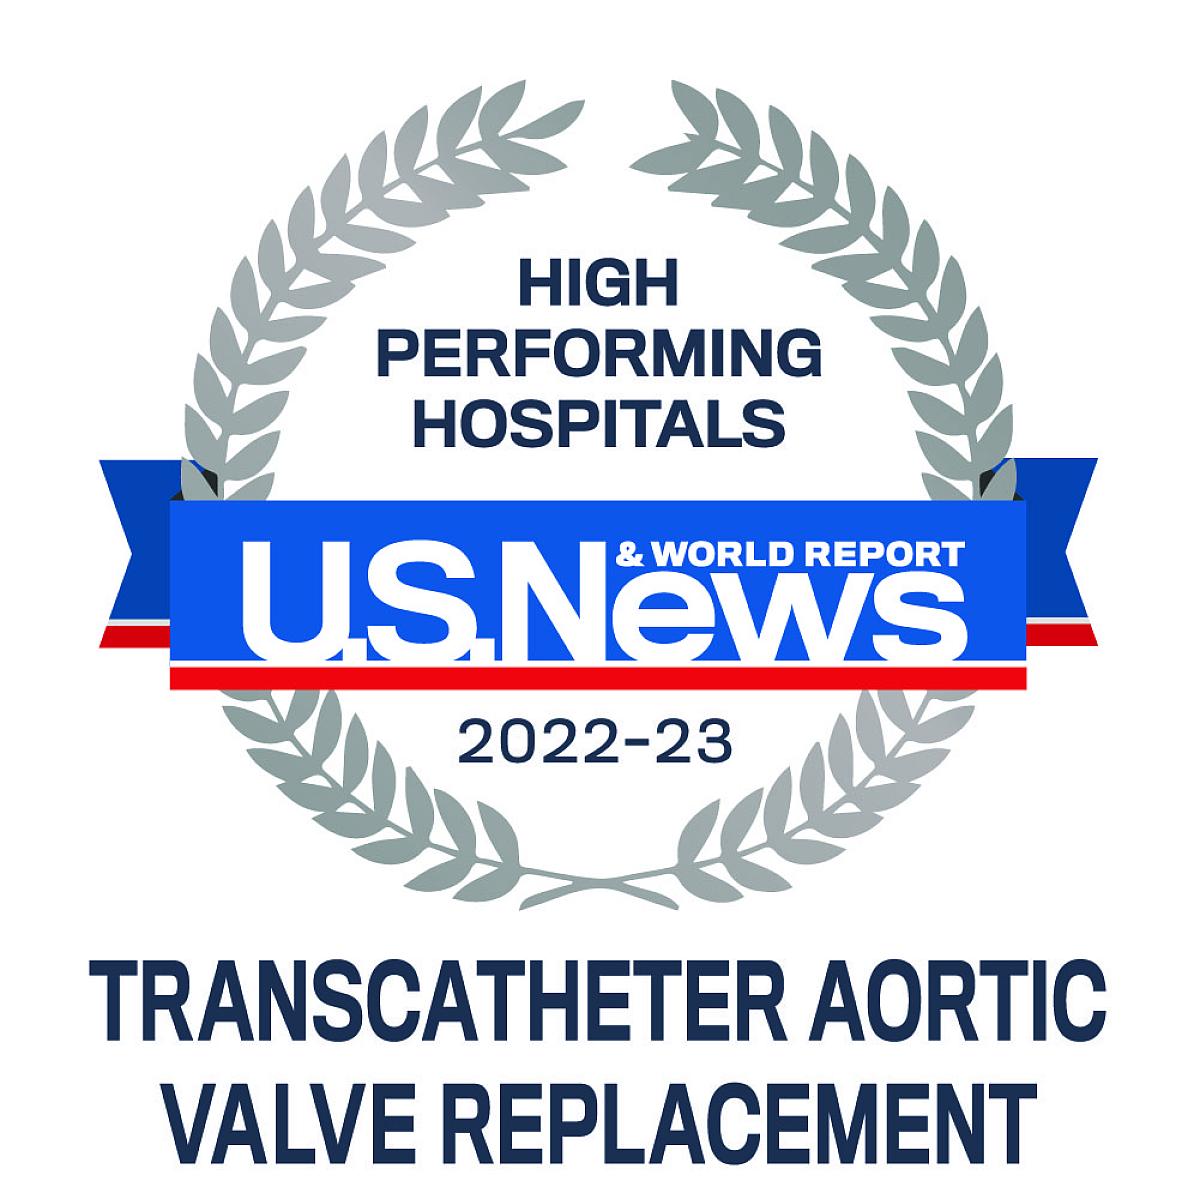 U.S. News and World Report High Performing TAVR